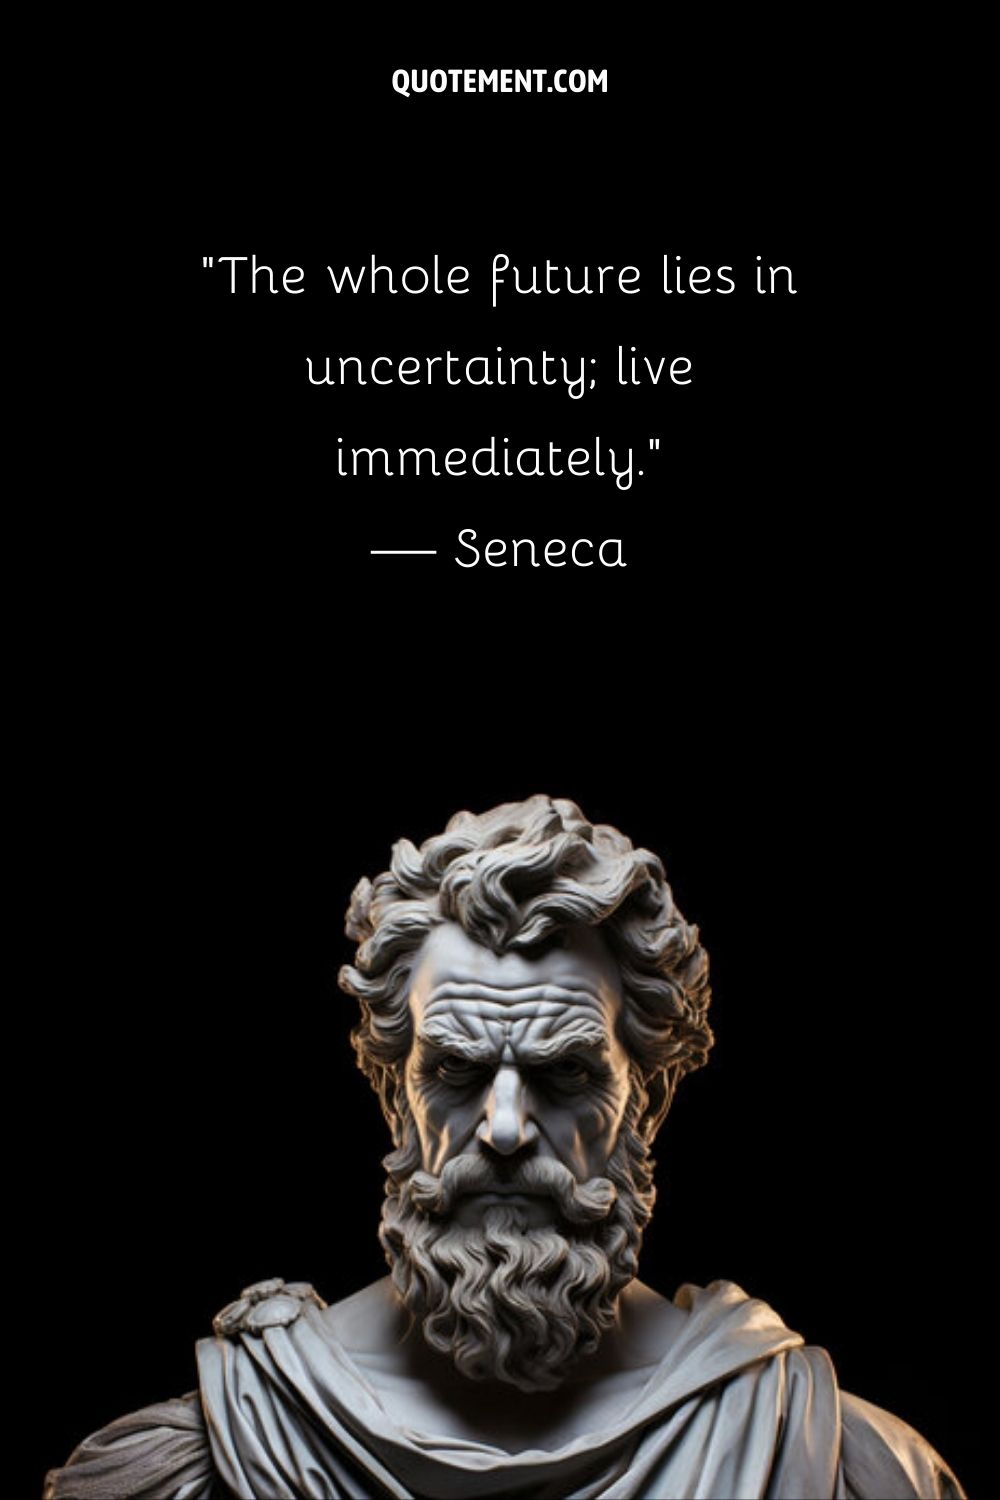 “The whole future lies in uncertainty; live immediately.” — Seneca